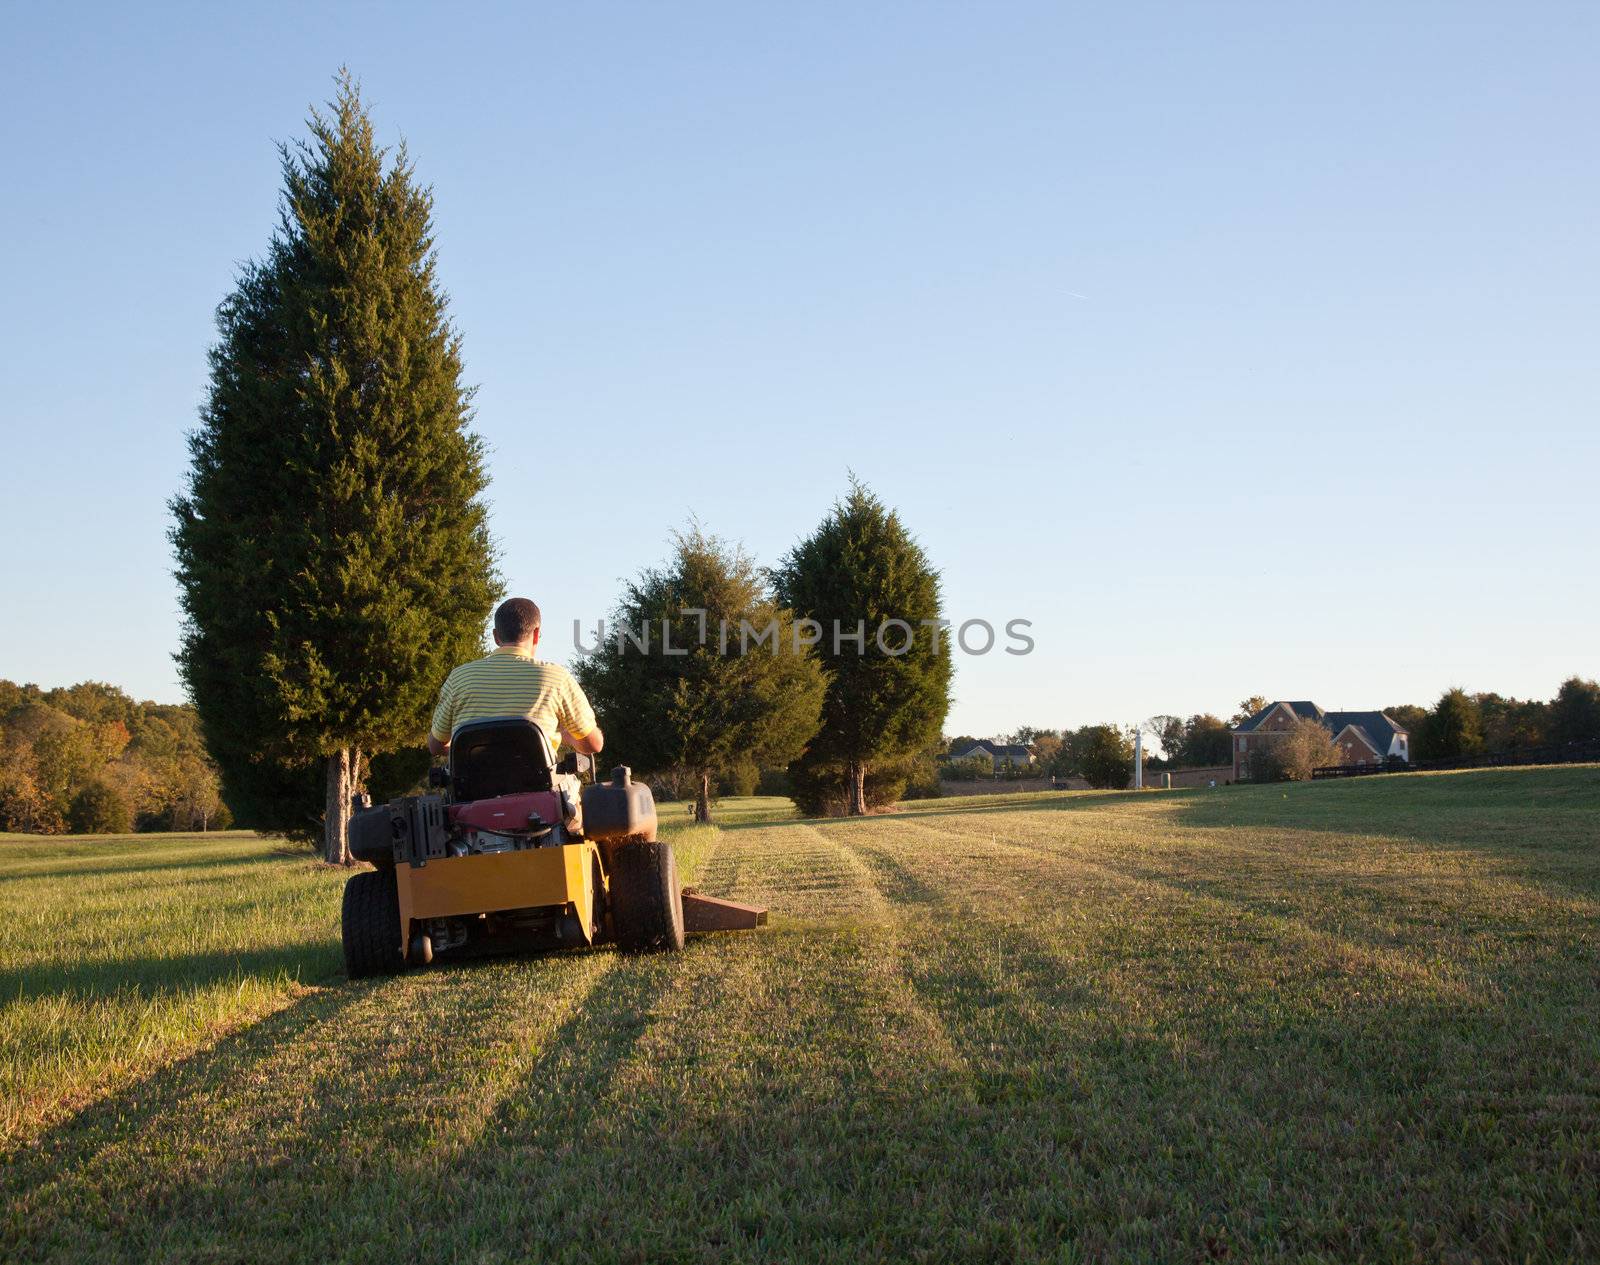 Middle aged man on zero turn mower cutting grass on a sunny day with the sun low in the sky